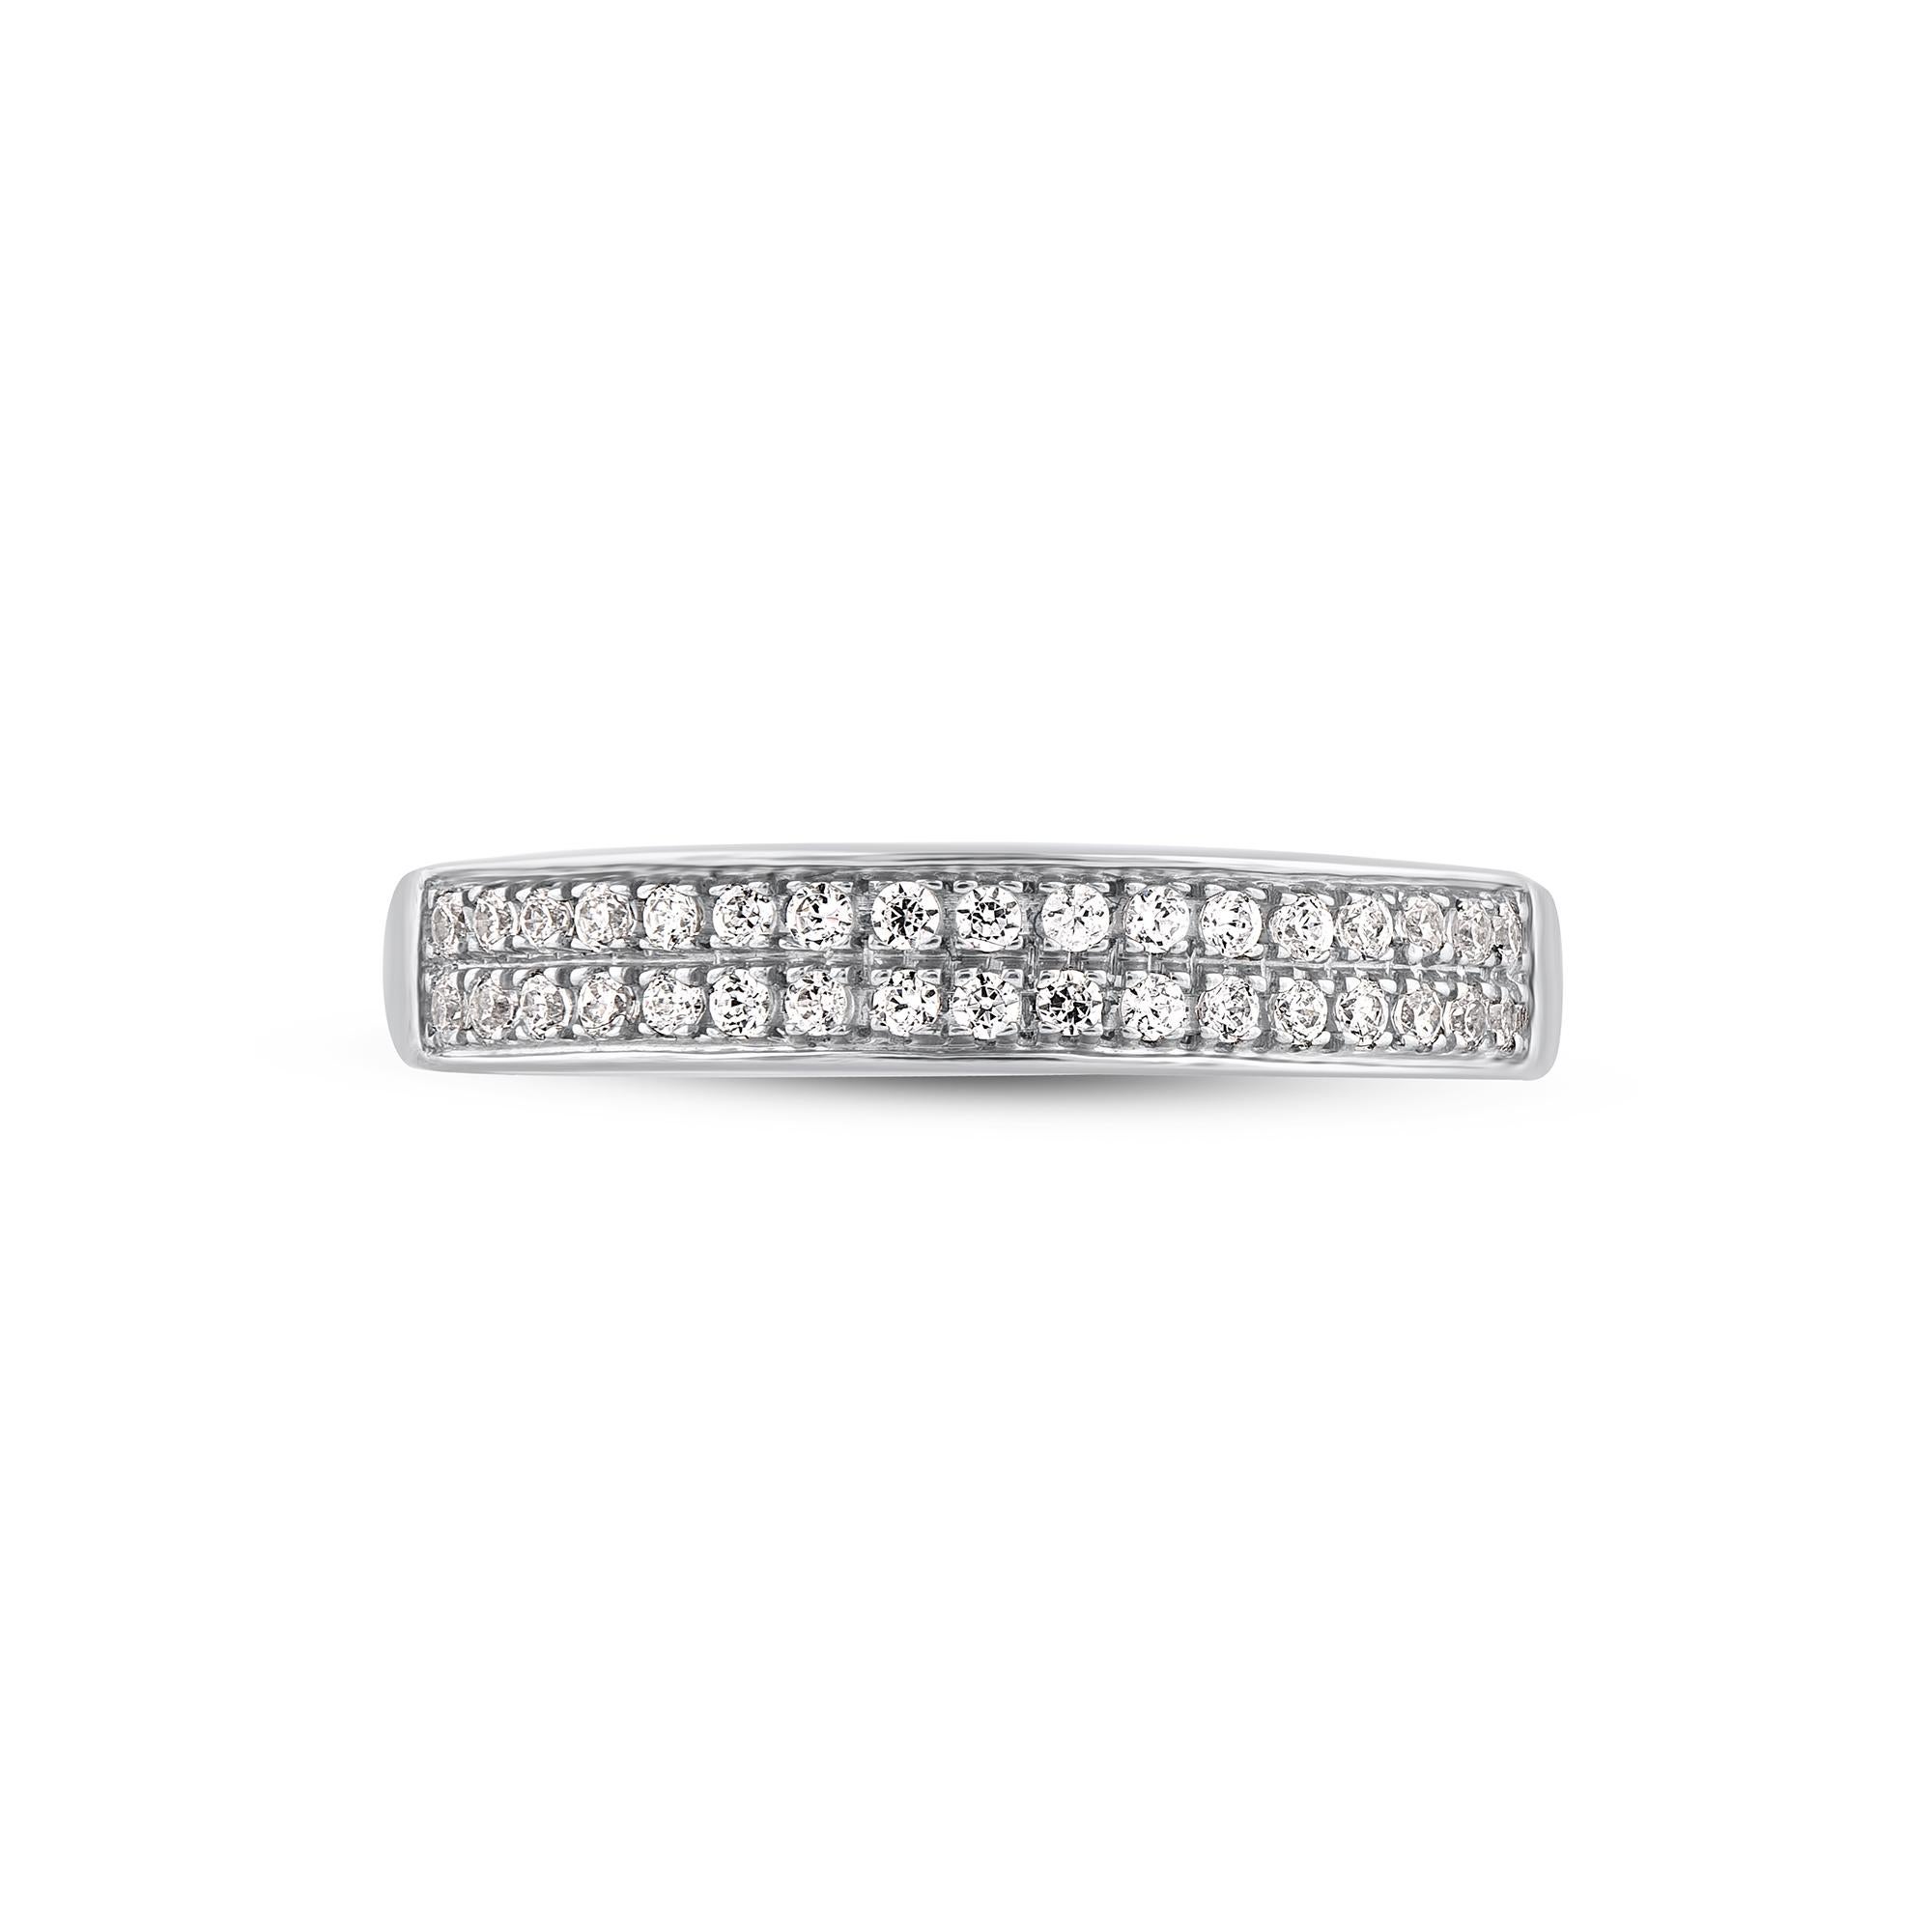 Honor your special day with this exceptional diamond band ring. This band ring features a sparkling 34 brilliant cut diamonds beautifully set in pave setting. The total diamond weight is 0.25 Carat. The diamonds are graded as H-I color and I2